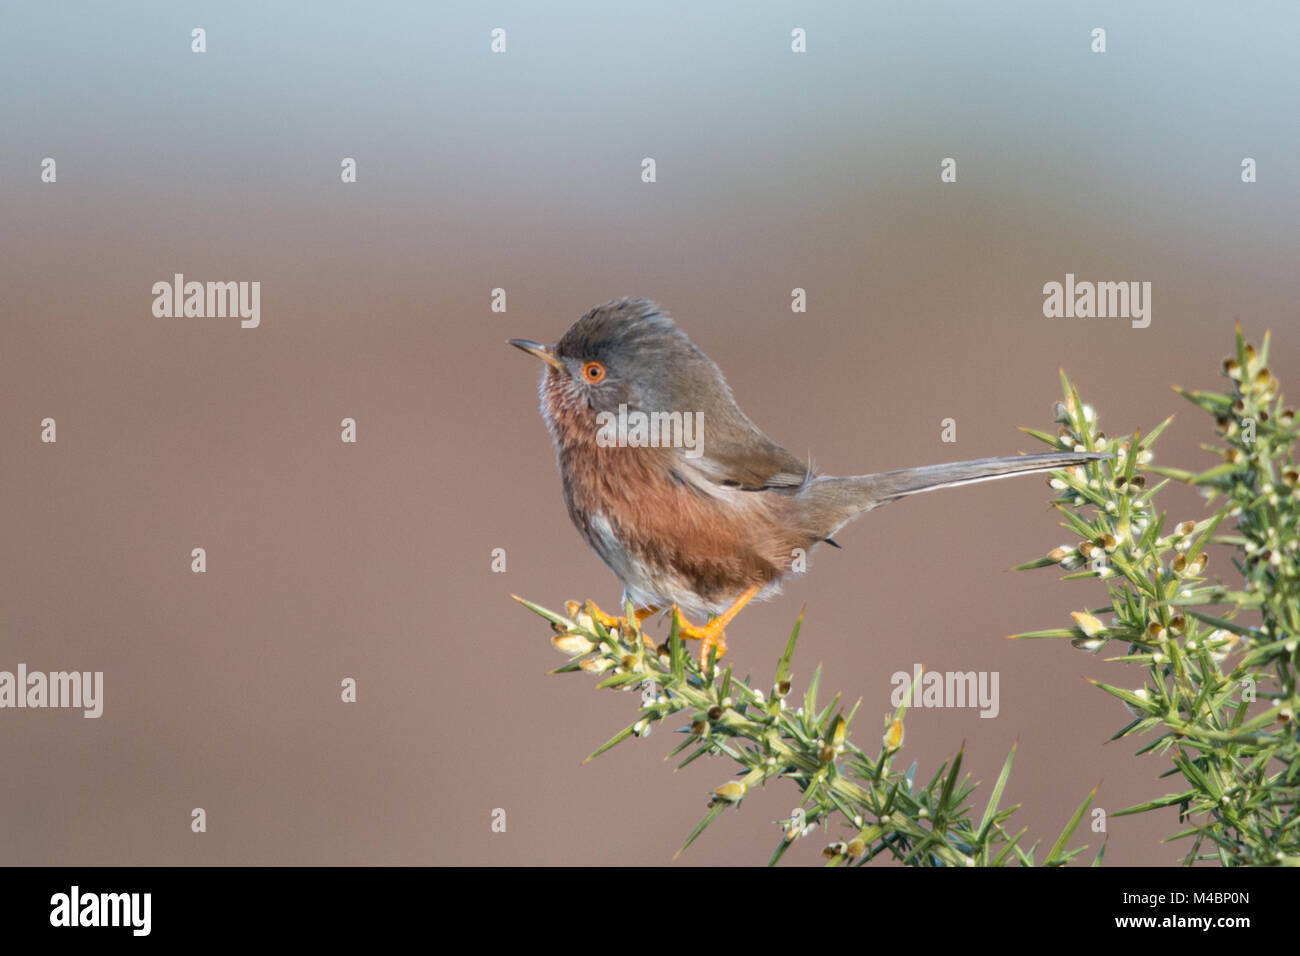 Dartford warbler (Sylvia undata) bird perched on a gorse bush at Thursley Common National Nature Reserve in Surrey, UK with copy space Stock Photo